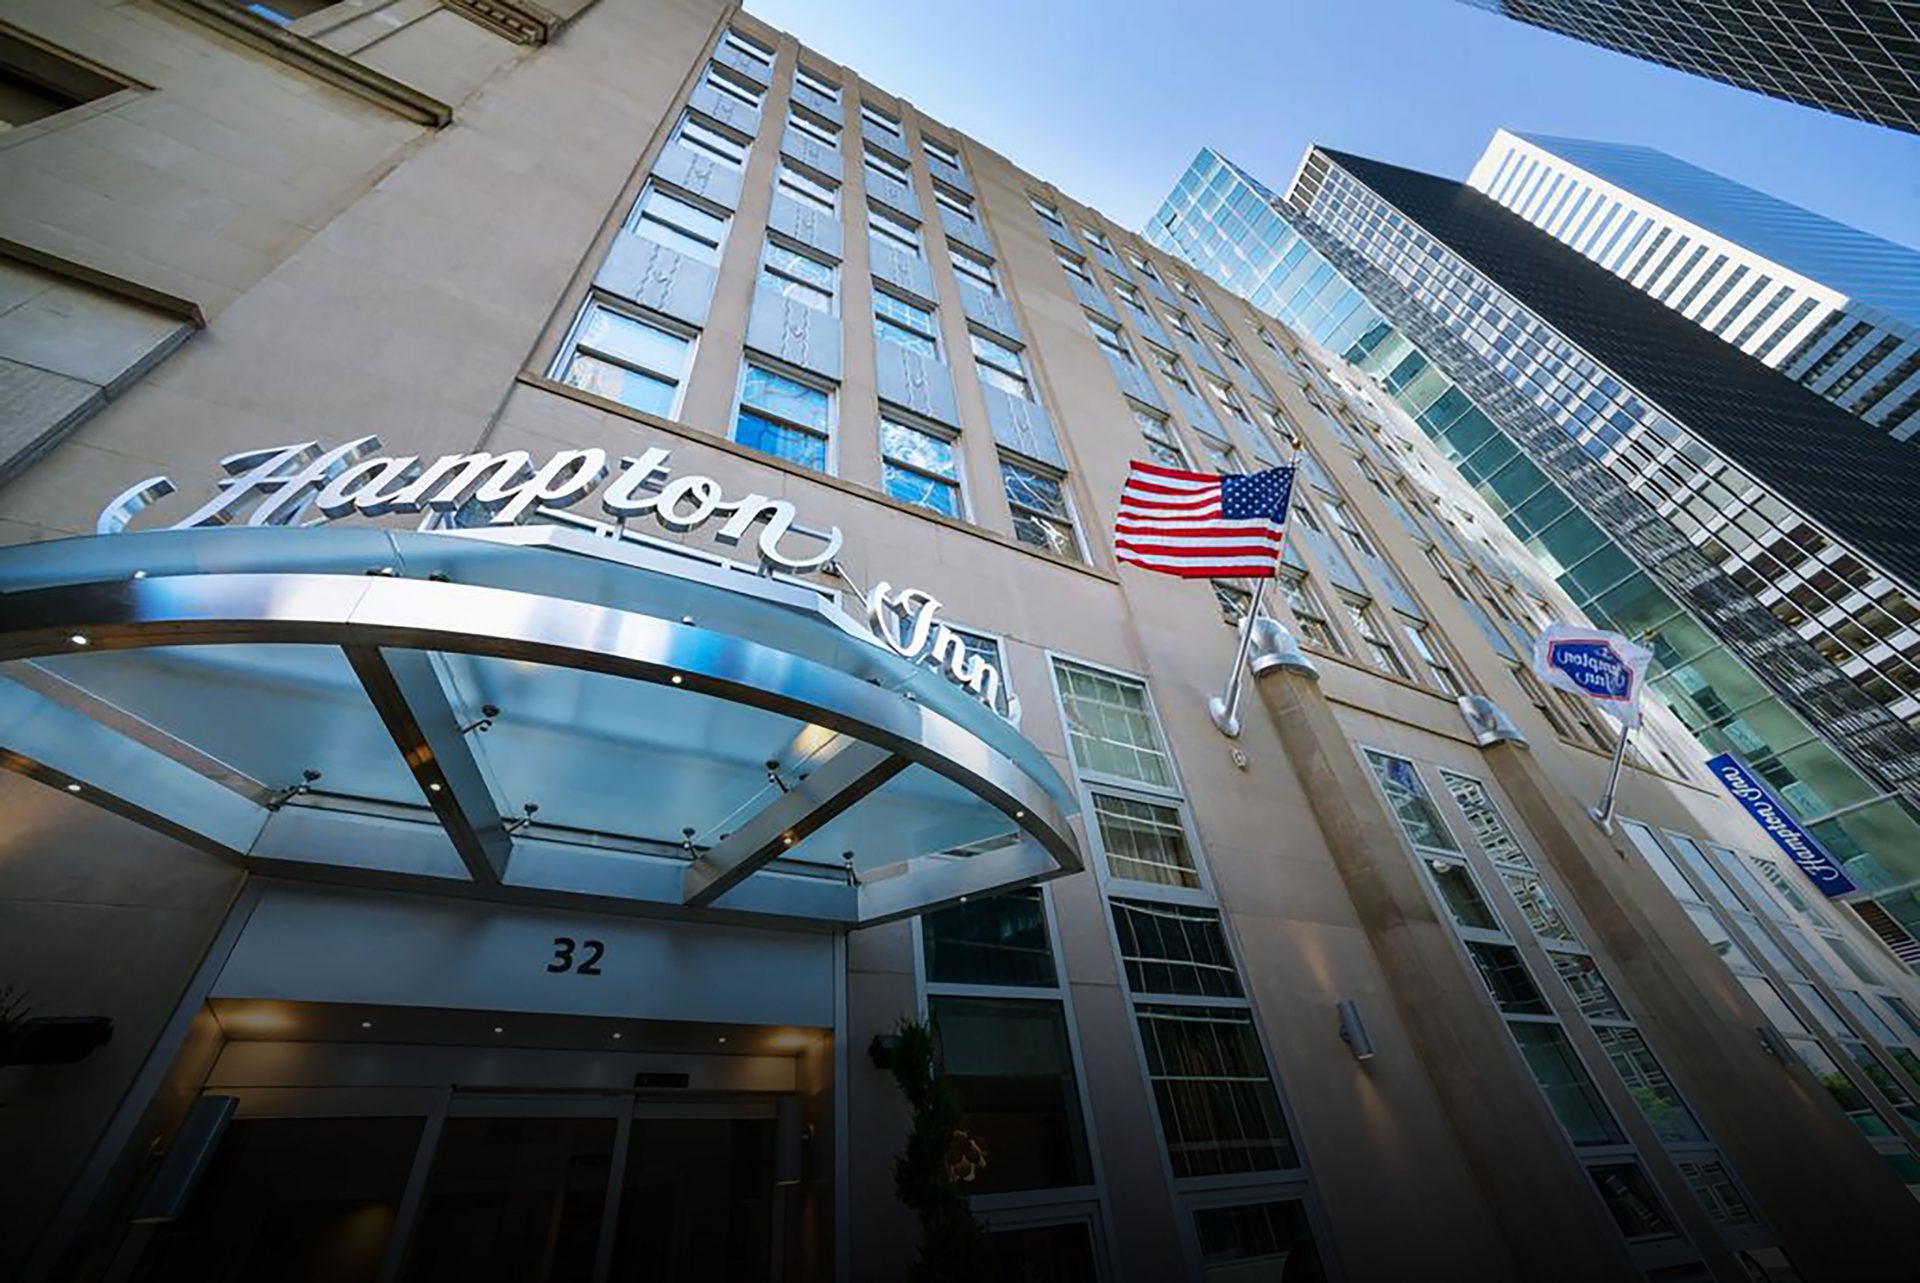 Shamin Hotels Expands to Big Apple, Rocky Mountains